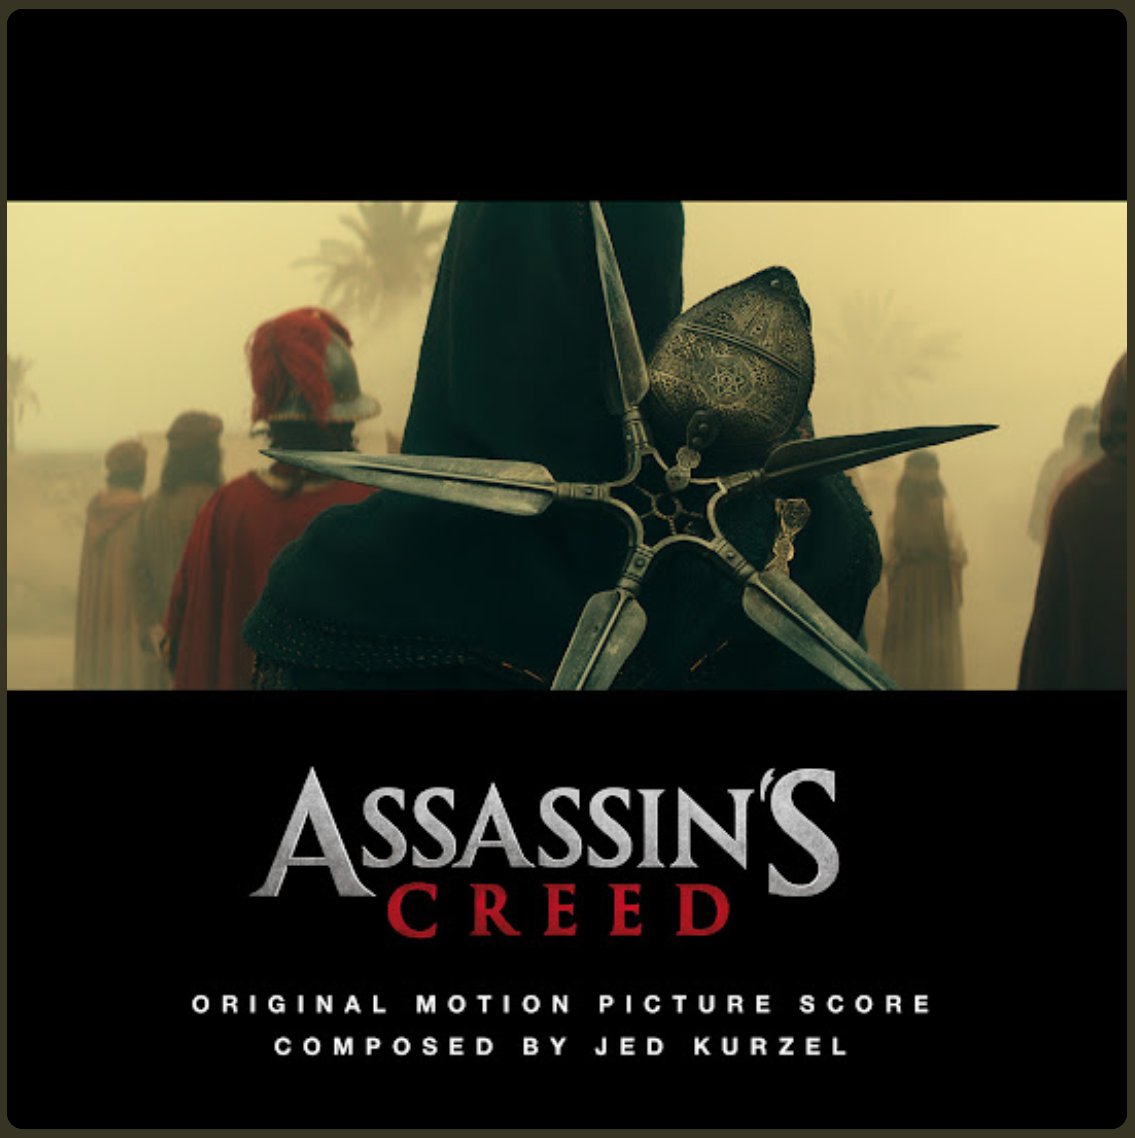 Listened to the soundtrack for @AssassinsMovie by #JedKurzel. This was a unique experience as Jed worked with his brother Justin on the movie as the composer.

My favorites are The Cure for Violence as it blends into The Bleeding Effect. I would recommend for fans of the film.